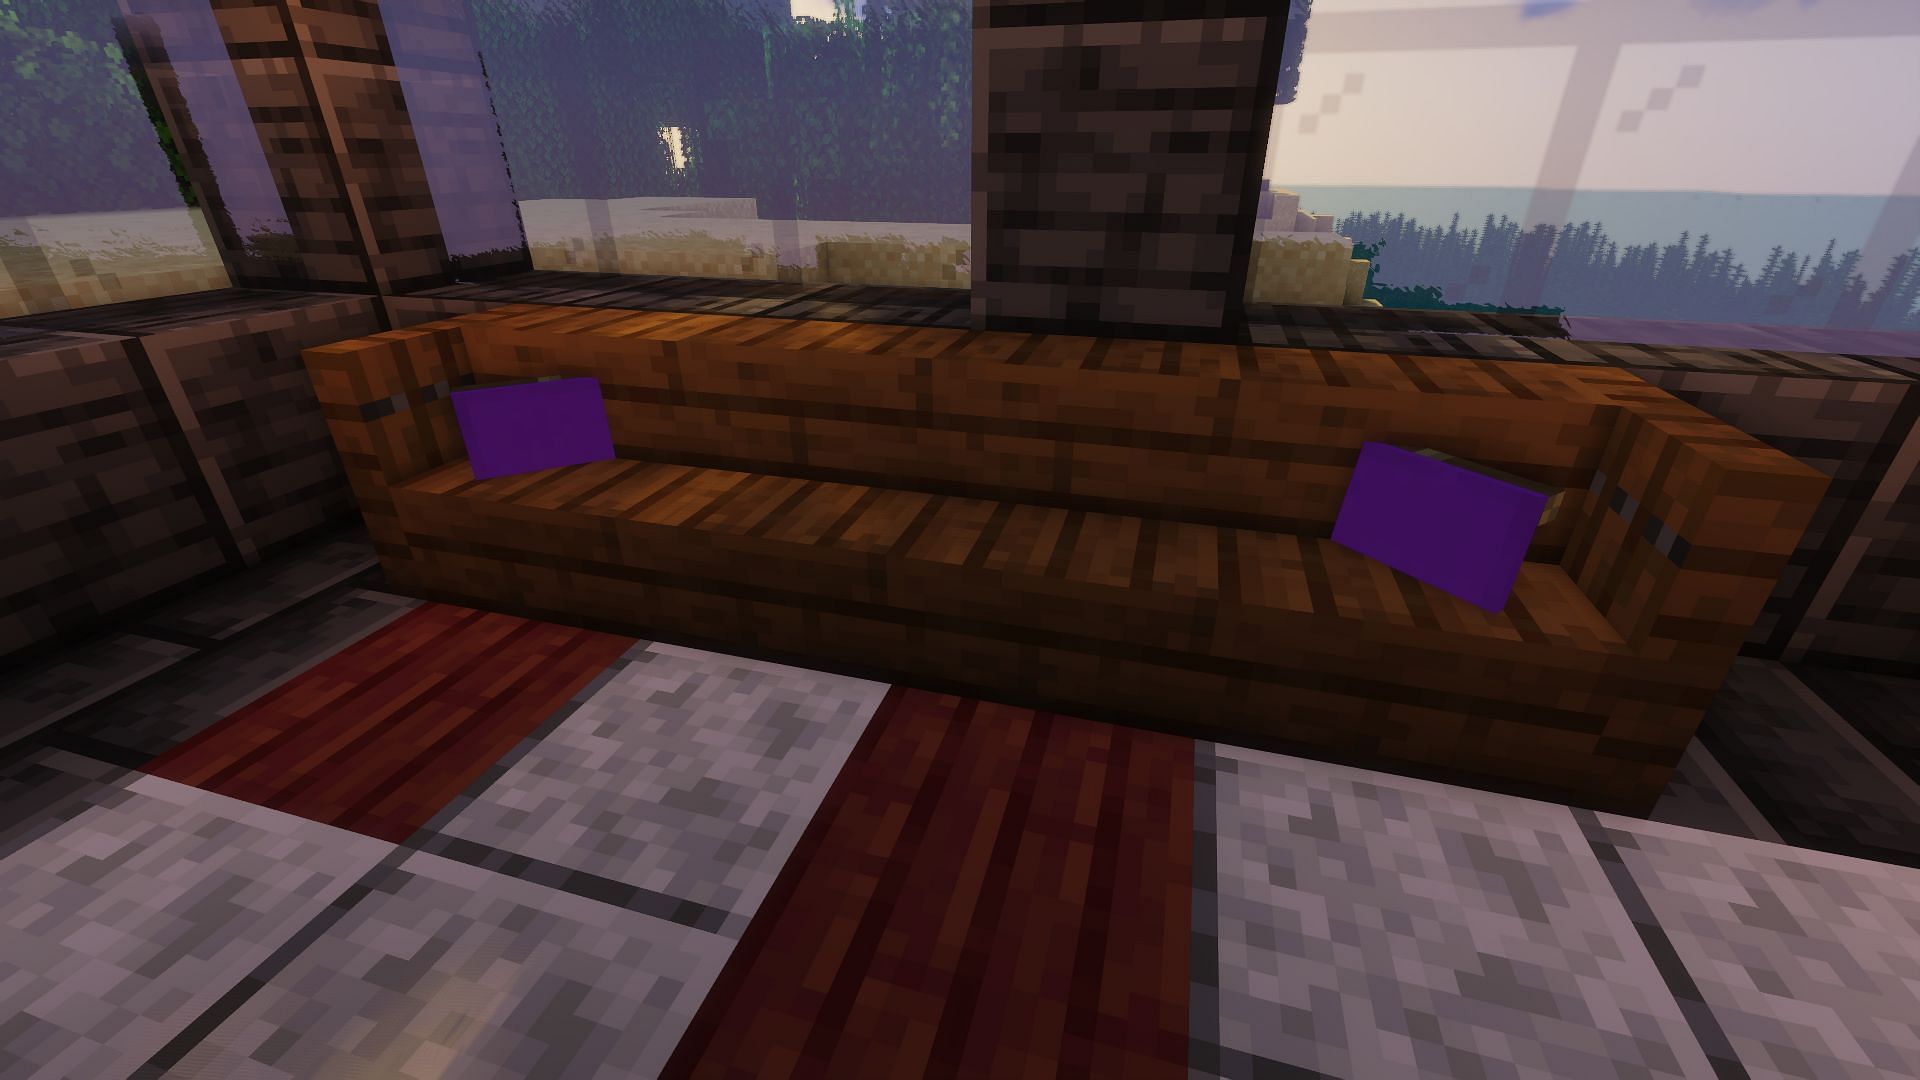 An example of a couch with pillows (Image via Minecraft)